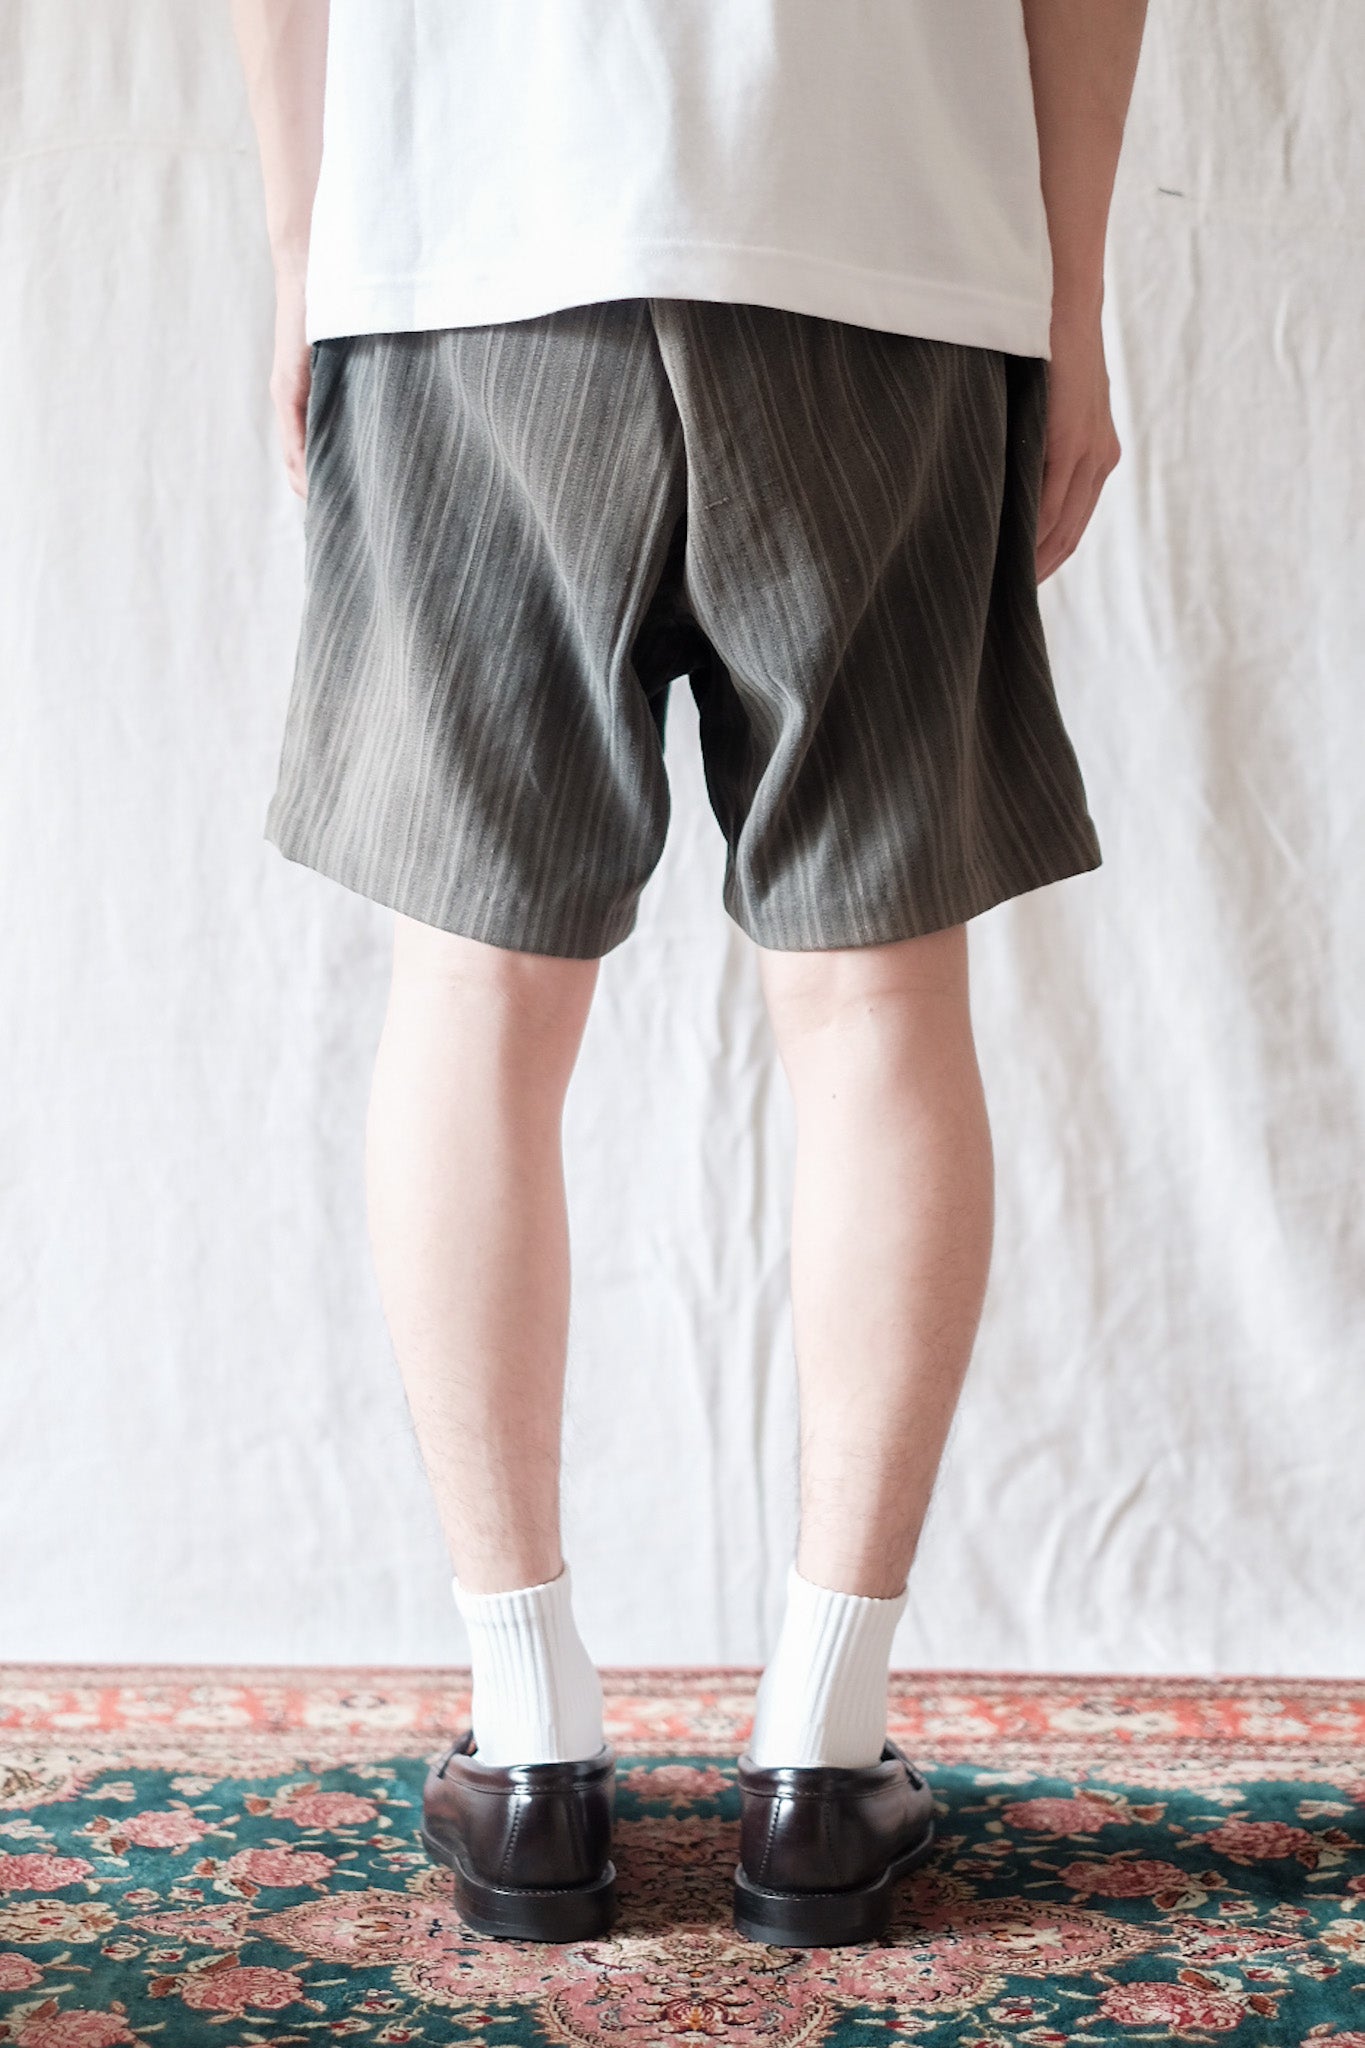 [~ 40's] French Vintage Cotton Striped Work Shorts